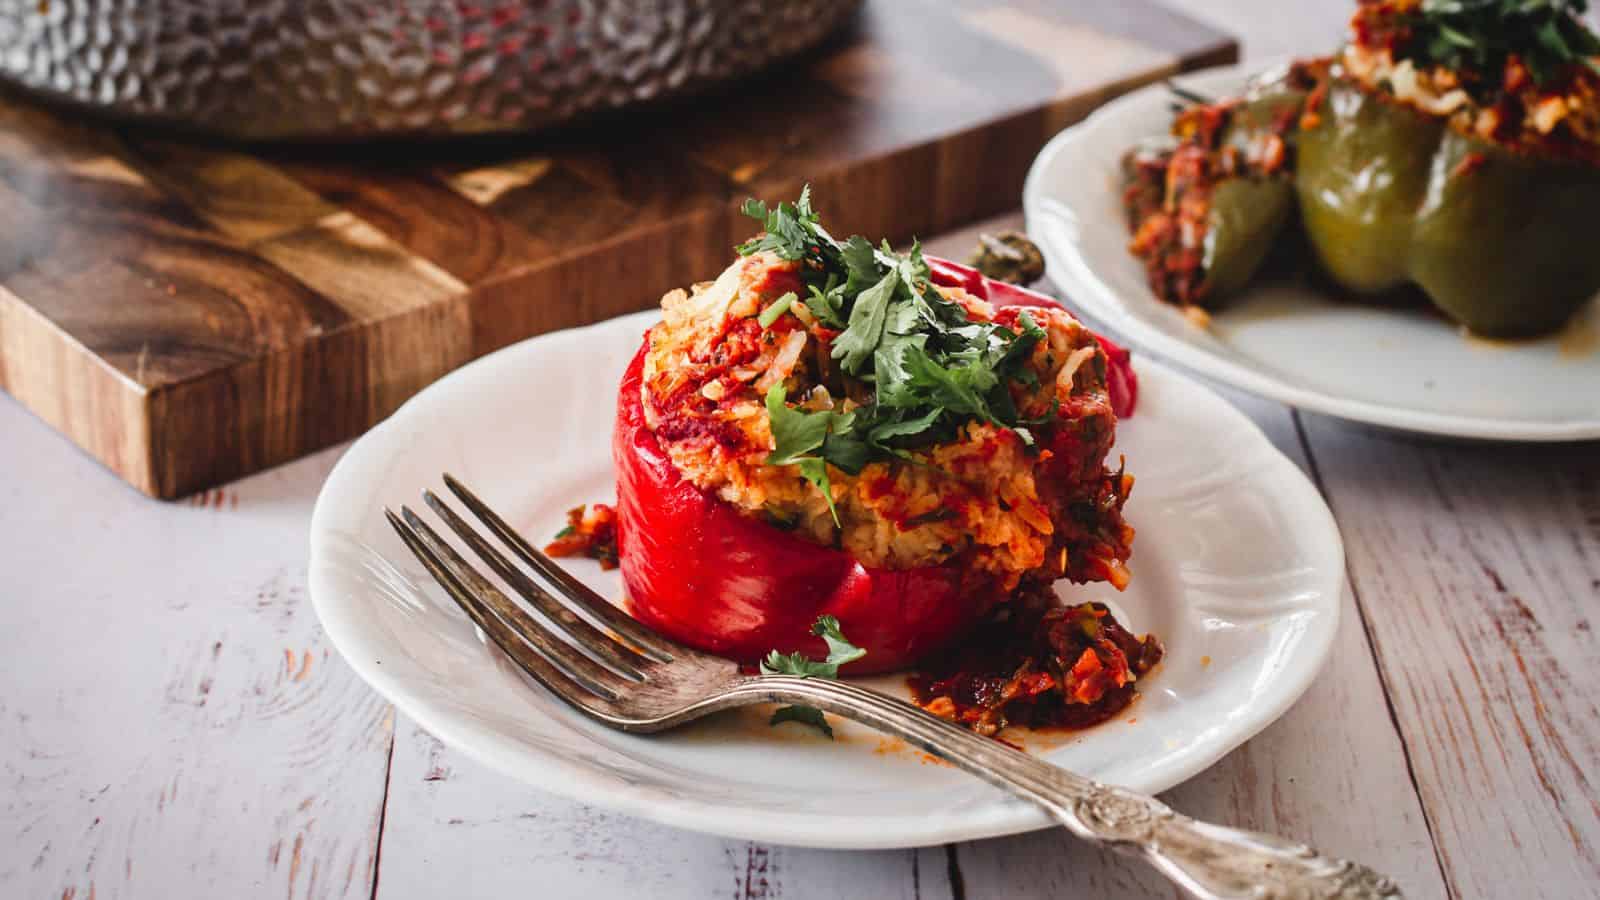 Stuffed red pepper on a plate with a fork.